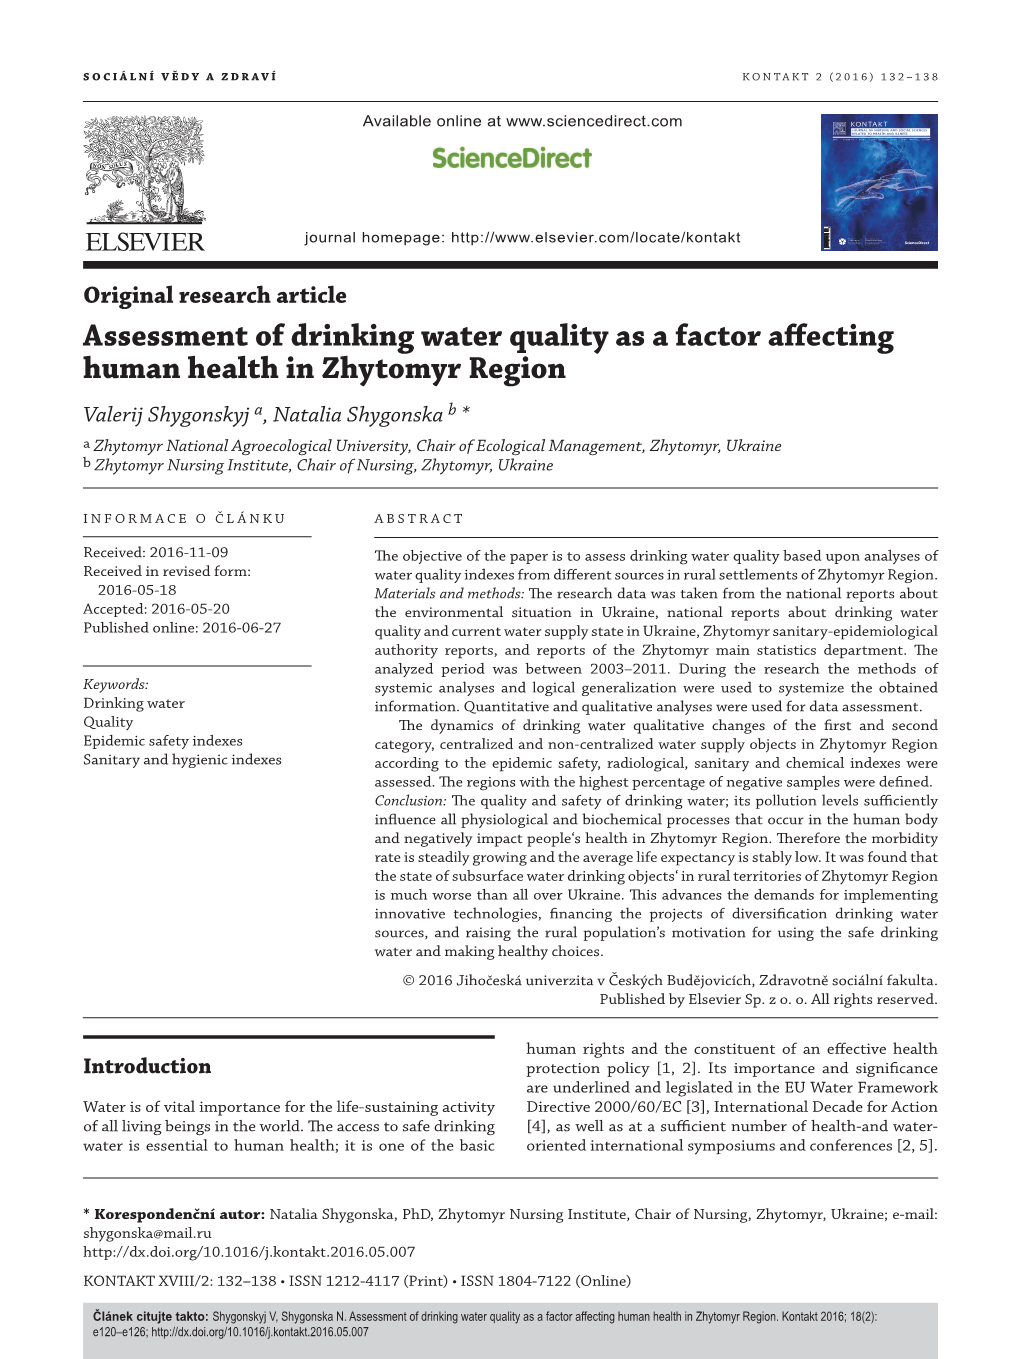 Assessment of Drinking Water Quality As a Factor Affecting Human Health